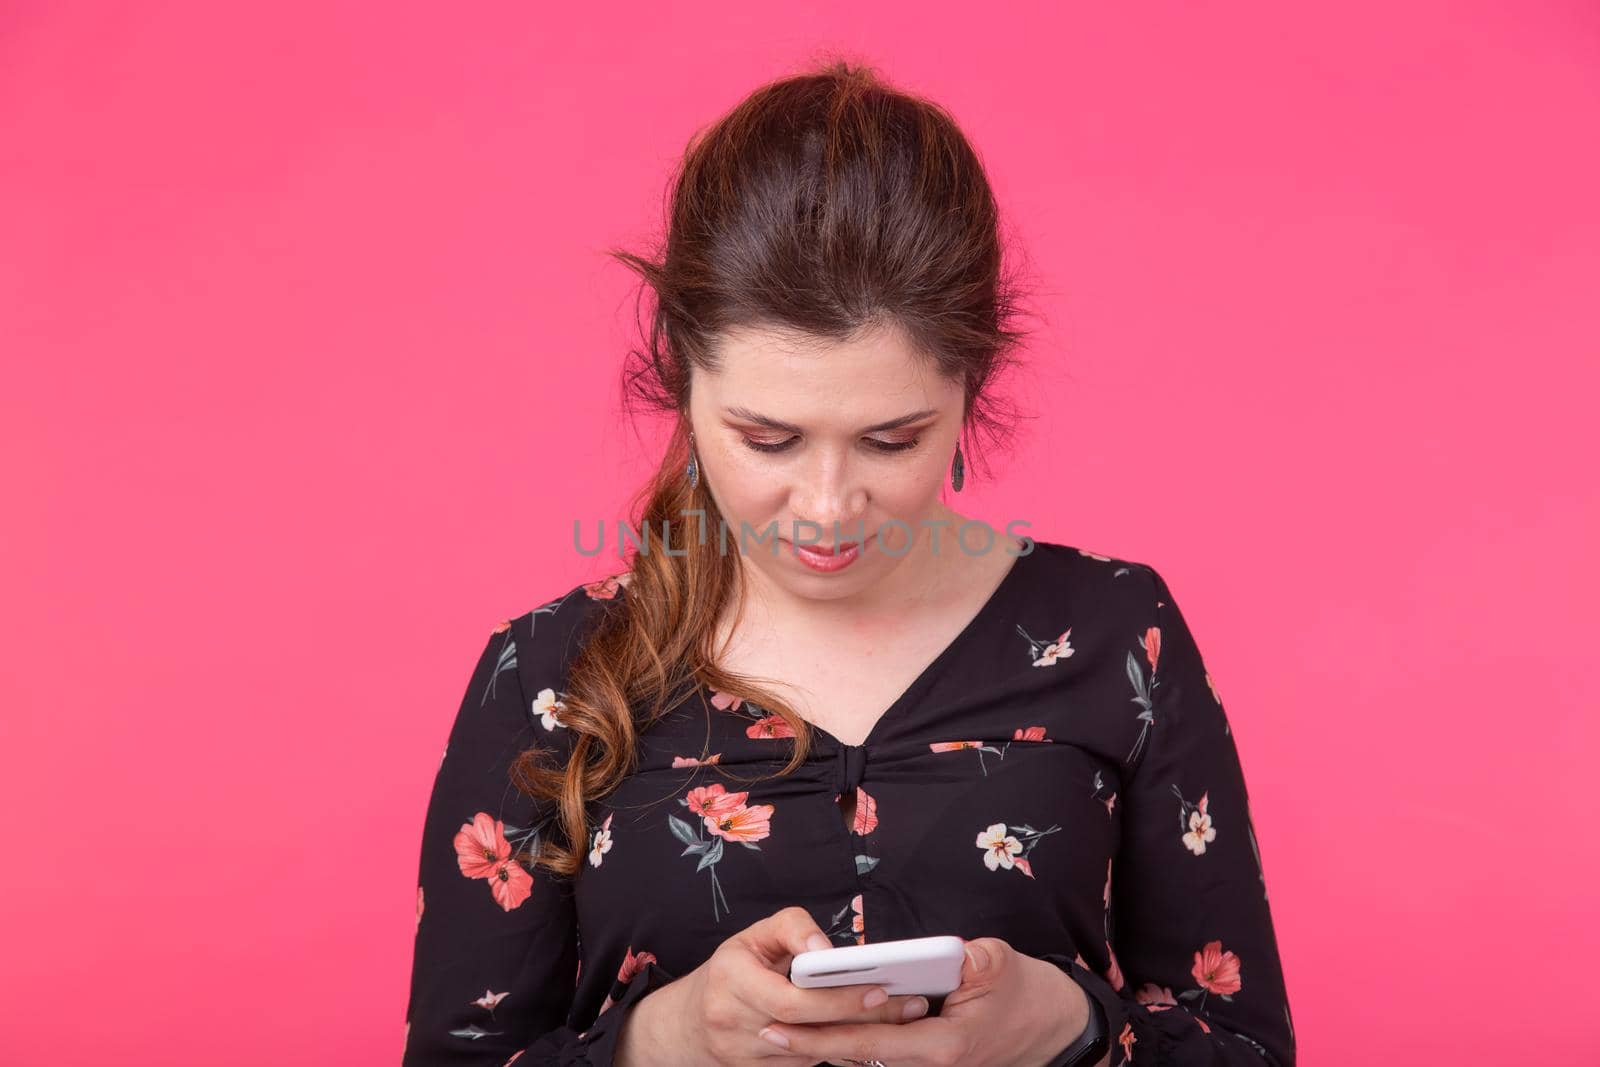 Communication and technologies concept - Portrait of a woman sending text message from her phone on pink background by Satura86